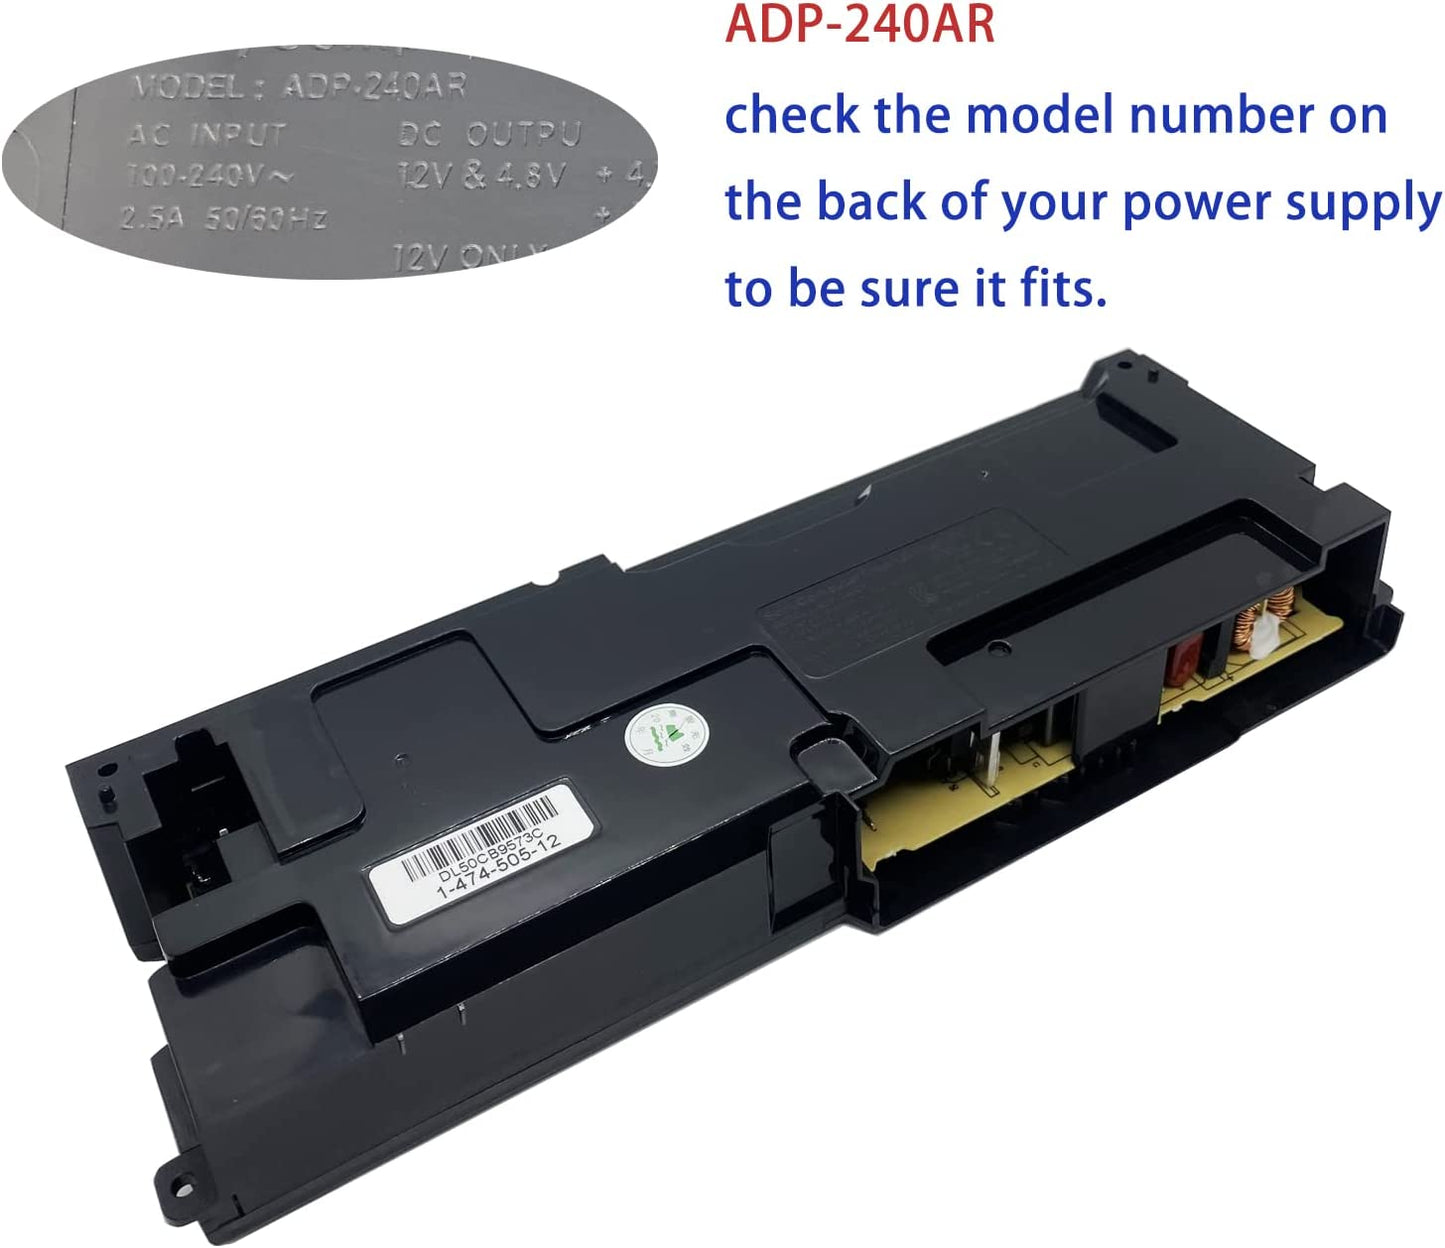 Replacement 5 Pin Power Supply ADP-240AR For PlayStation 4 CUH-1001A CUH-1003A Console